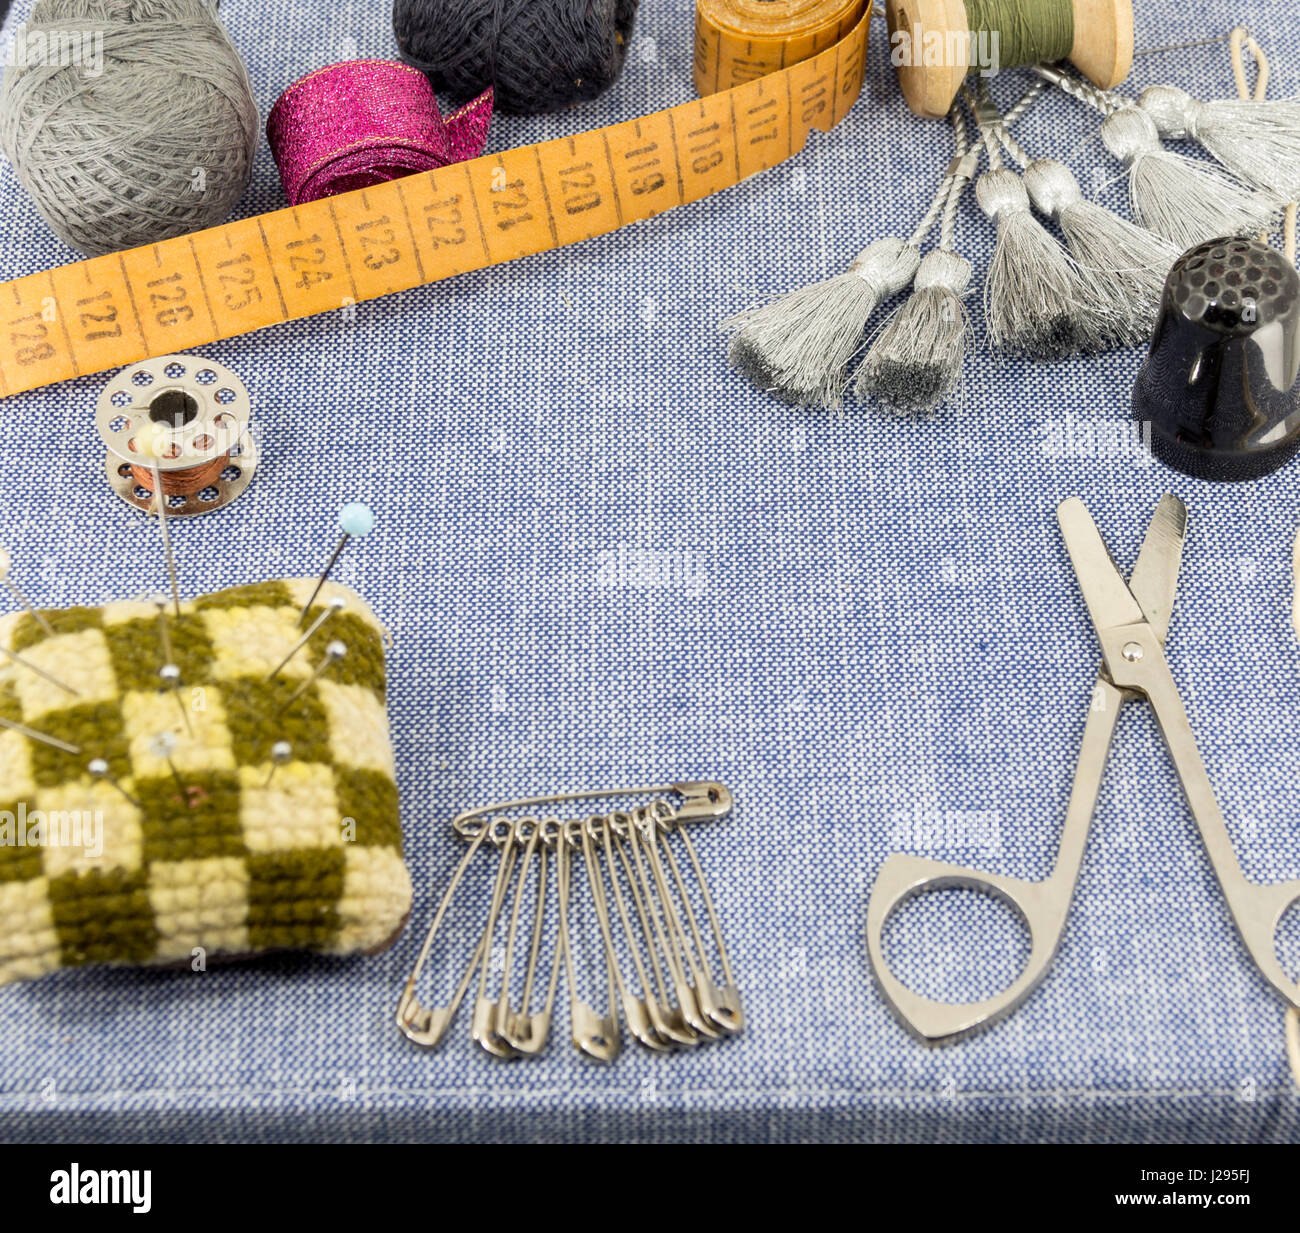 Beautifully laid out accessories for needlework on a jeans background Stock Photo